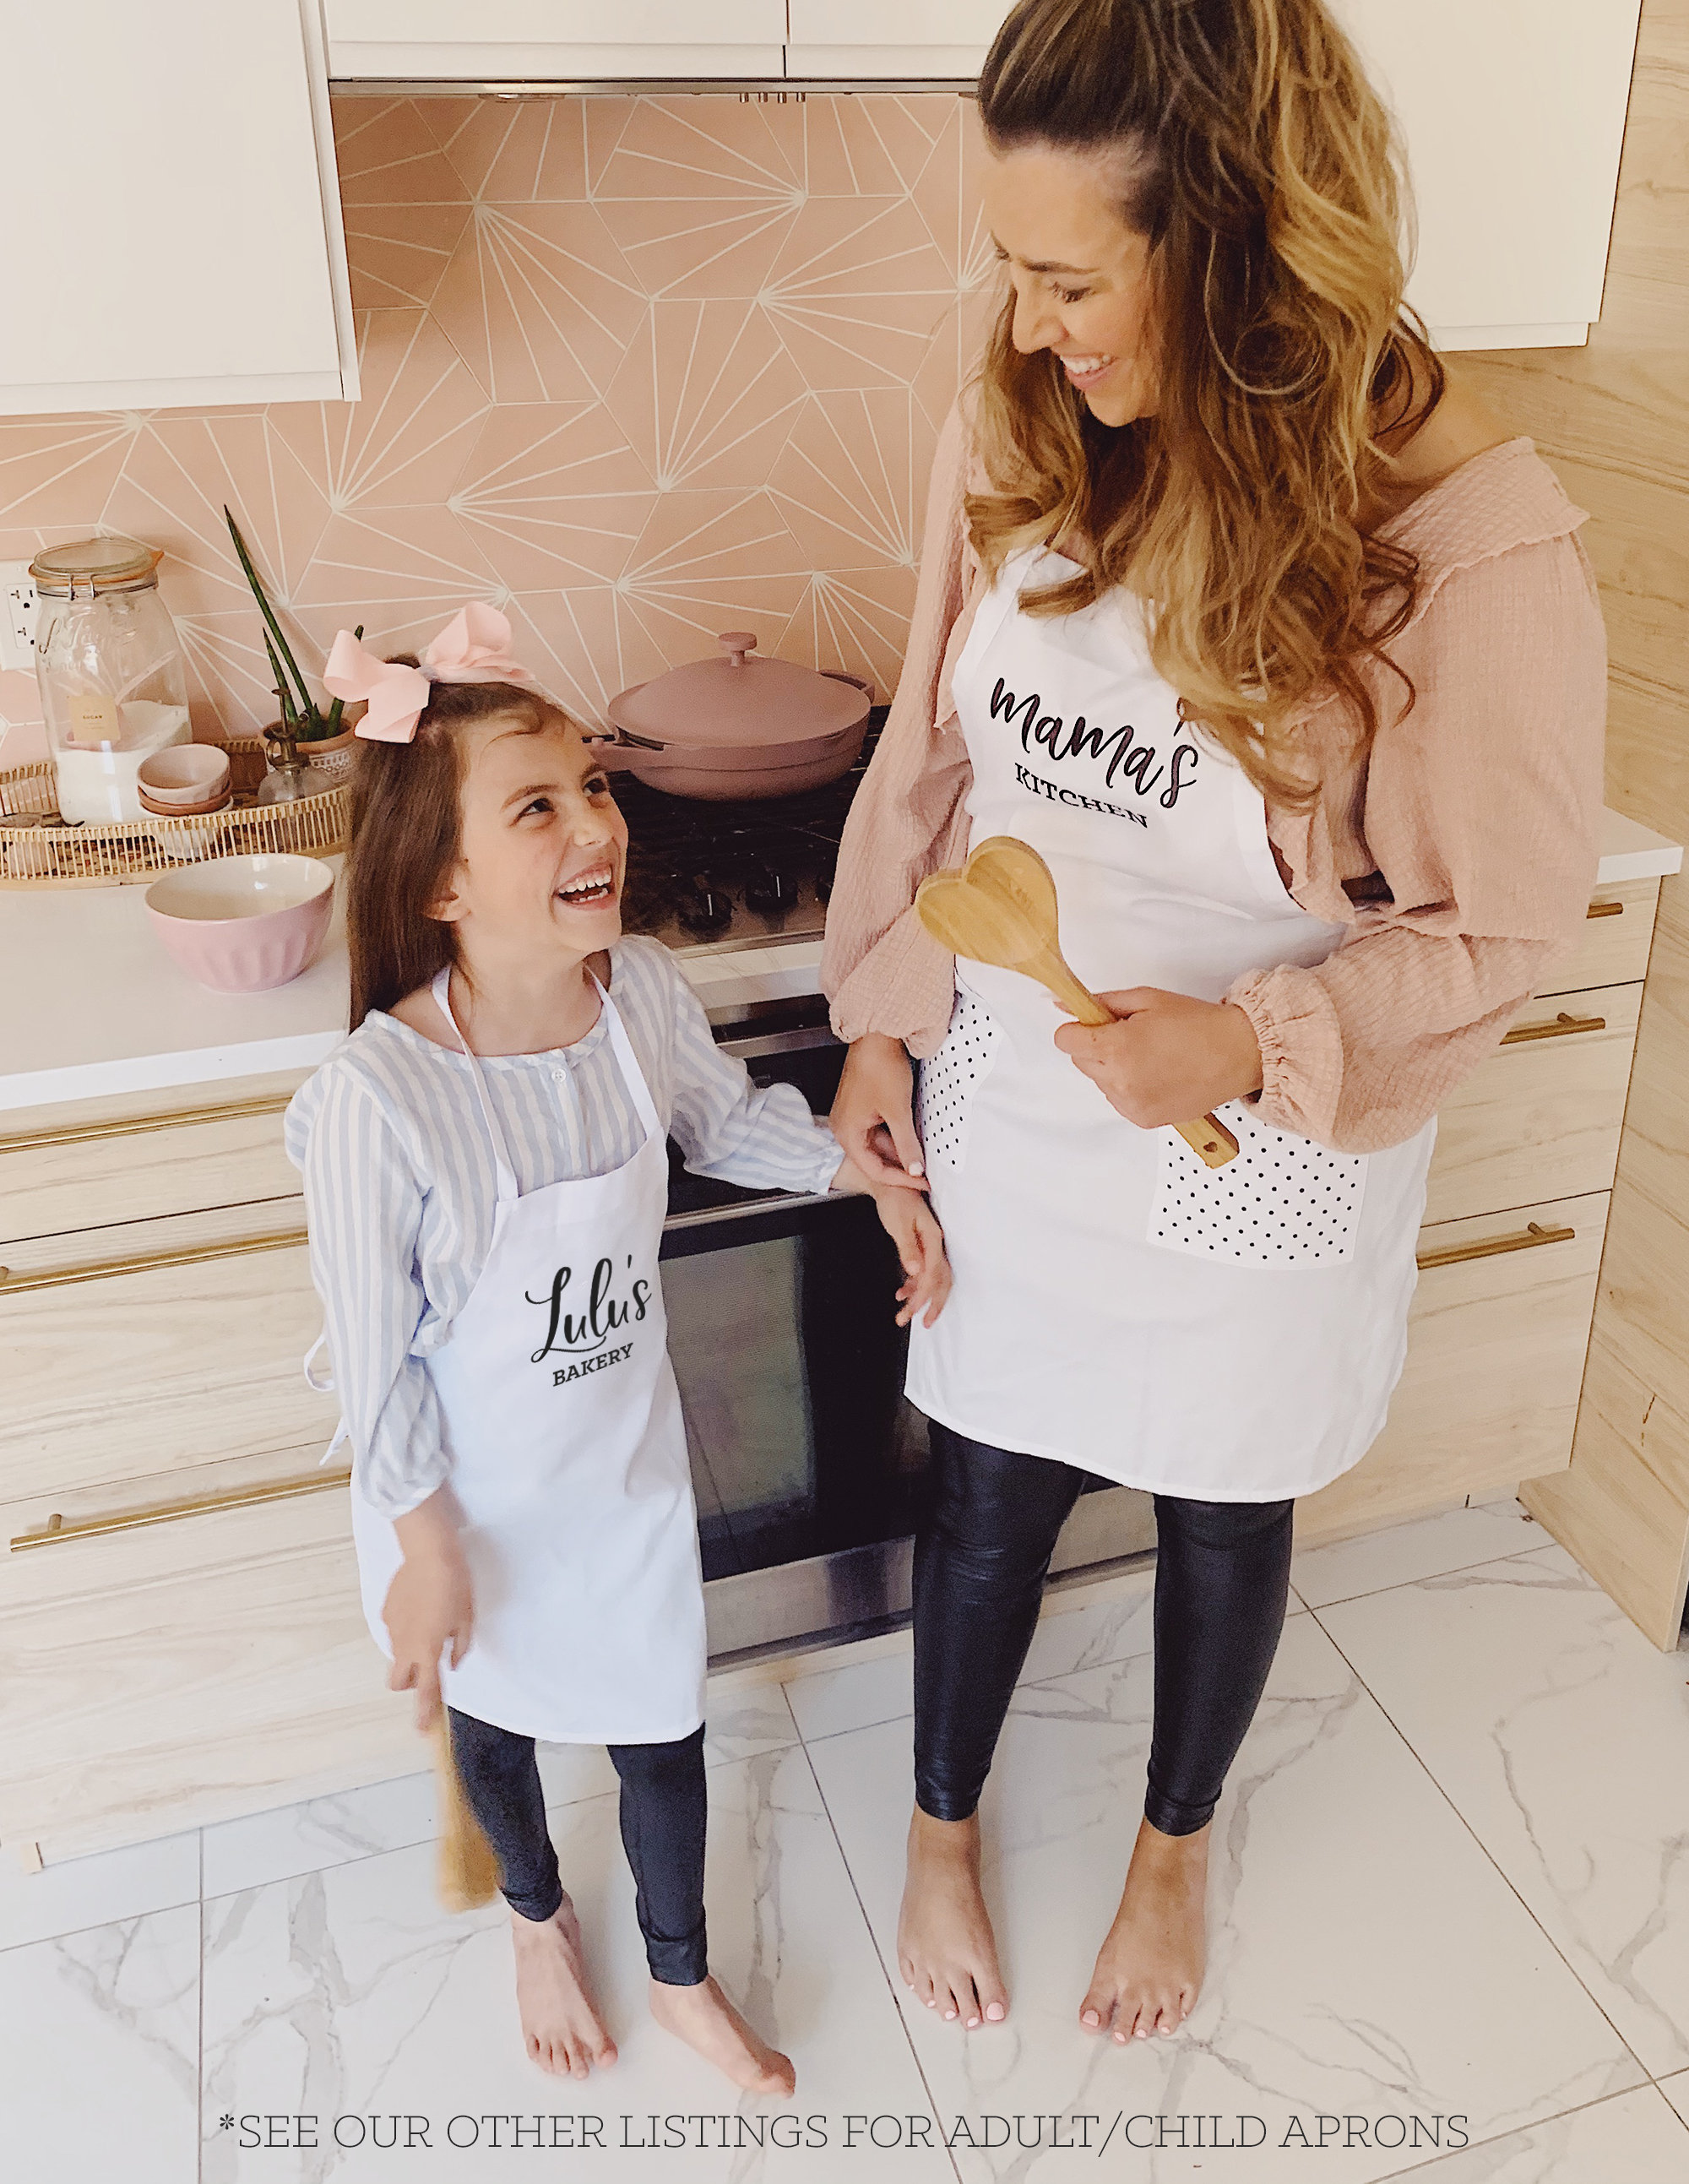 Mom-kid apron set for cooking lessons, adorable photos